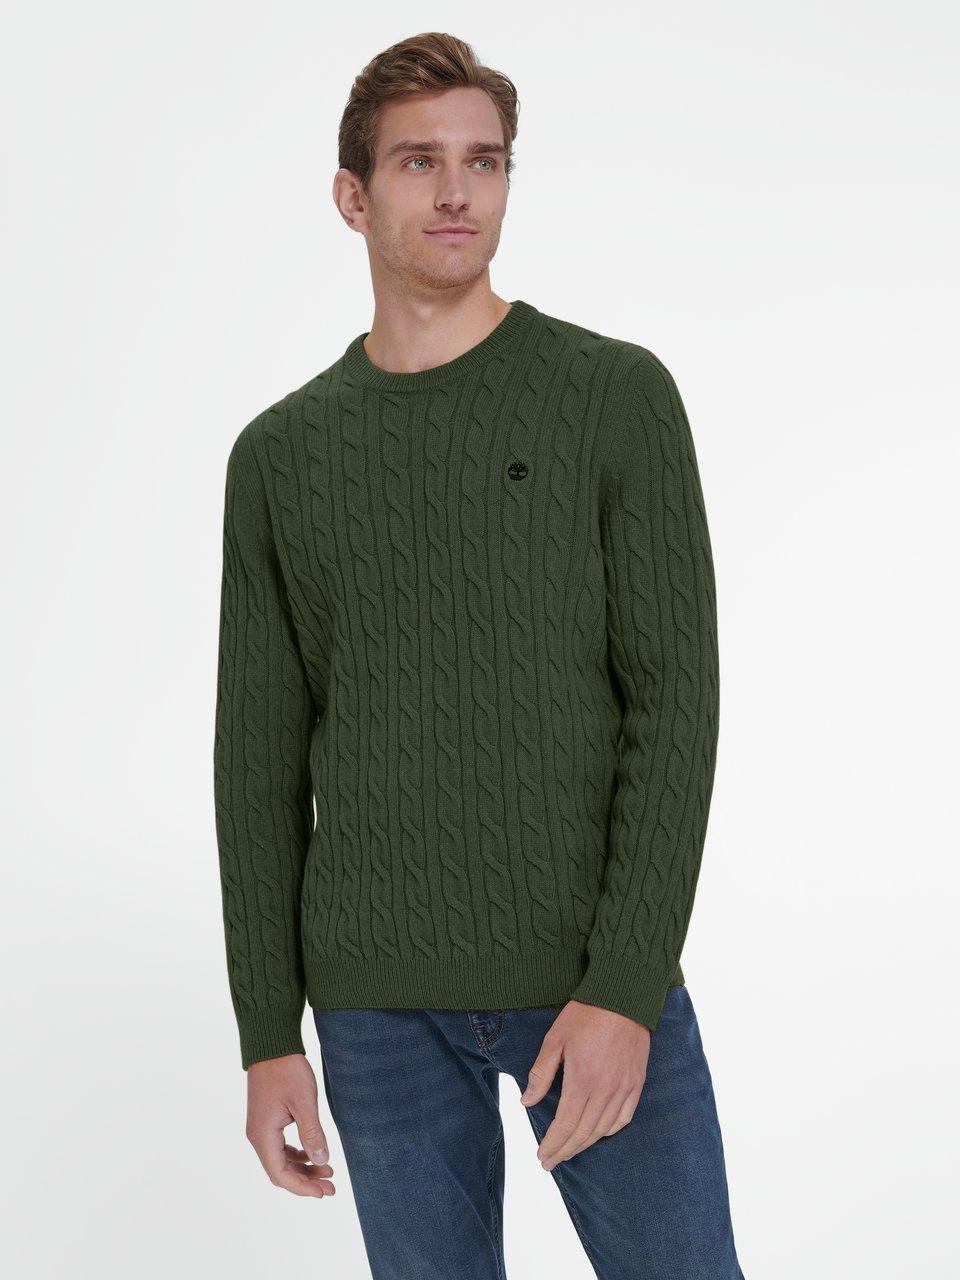 Timberland - Le pull « Lambswool Cable »